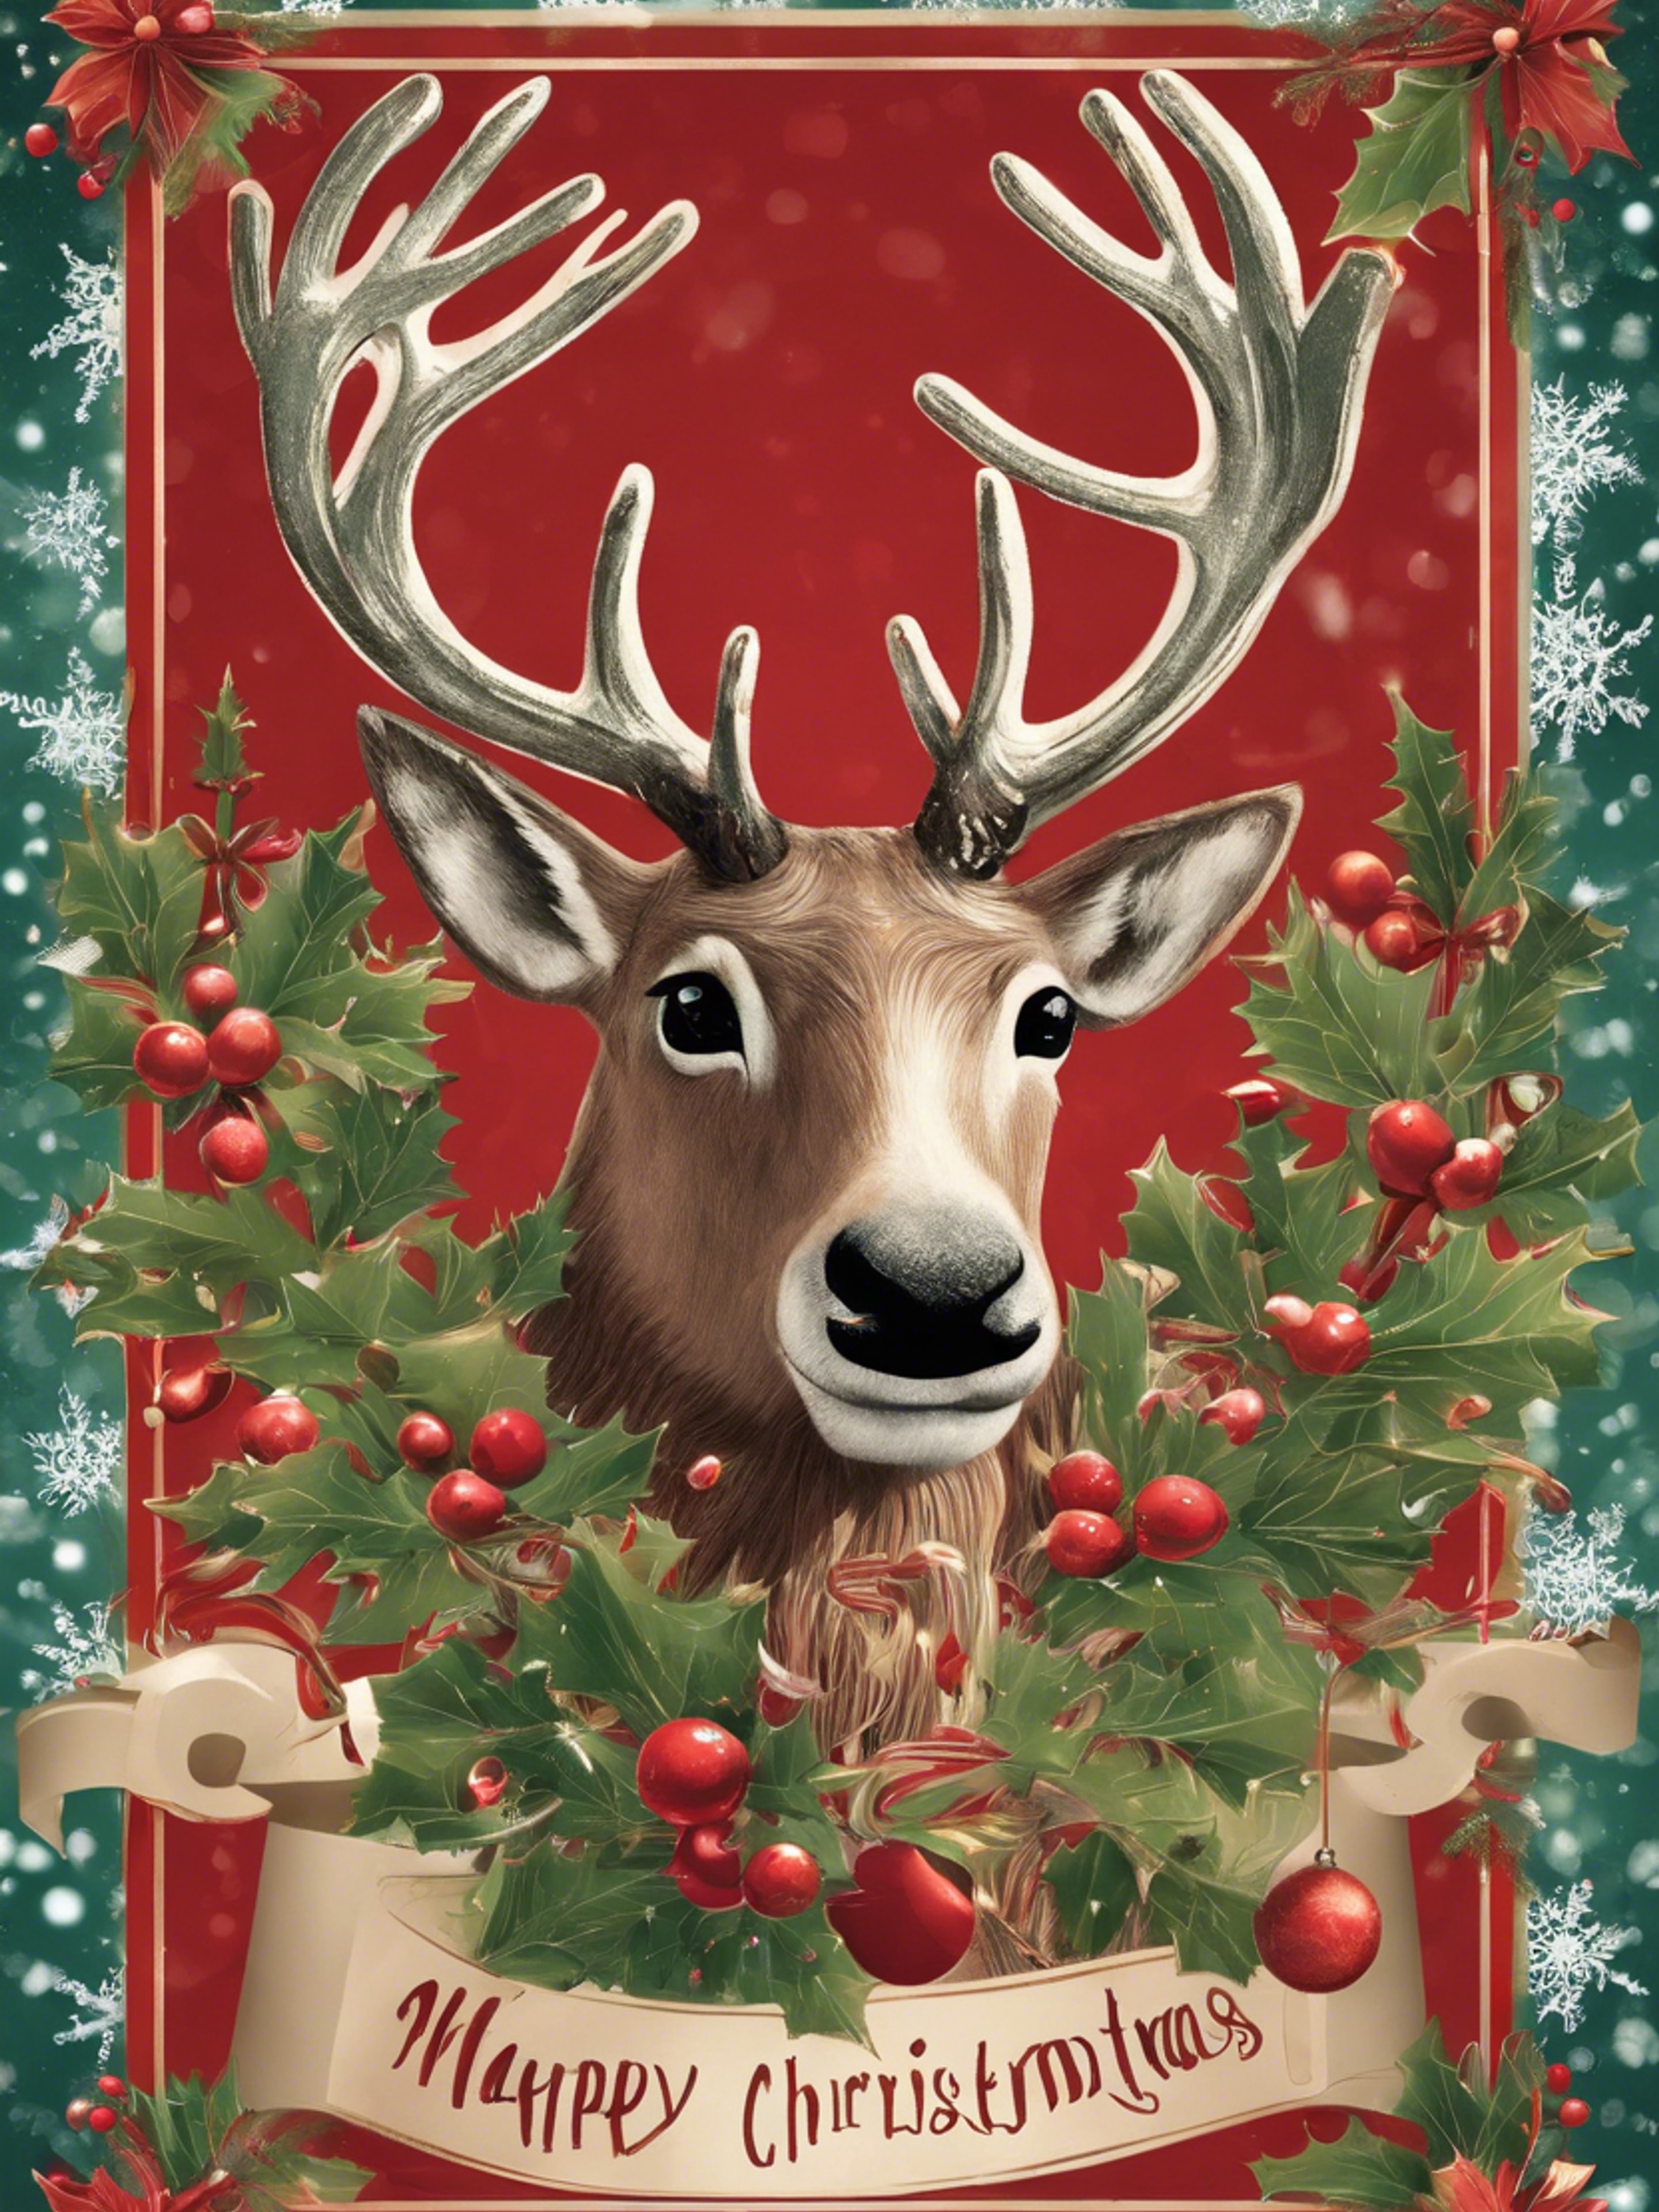 A retro Christmas card design featuring stylized reindeer, ornaments, snowflakes, and mistletoe, all tied together with a festive holiday greeting.壁紙[765bb40fb9ba4973b73d]